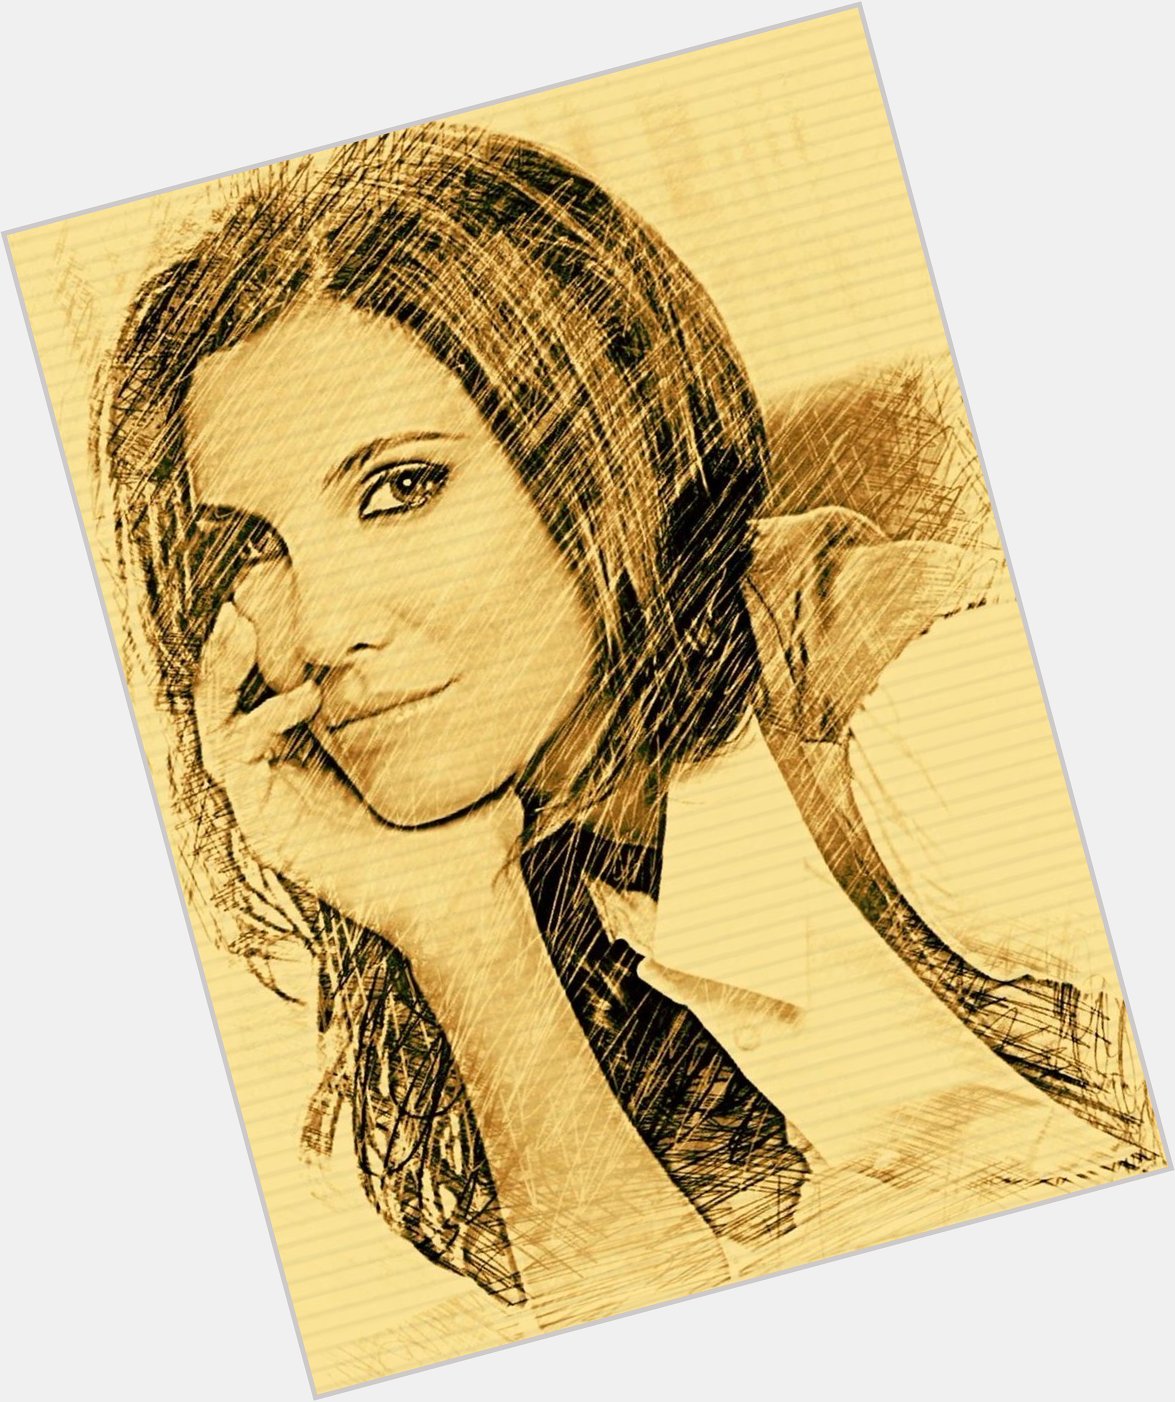 Happy Birthday Daniela Ruah!!   Hope you have a wonderful day  With love from Japan 